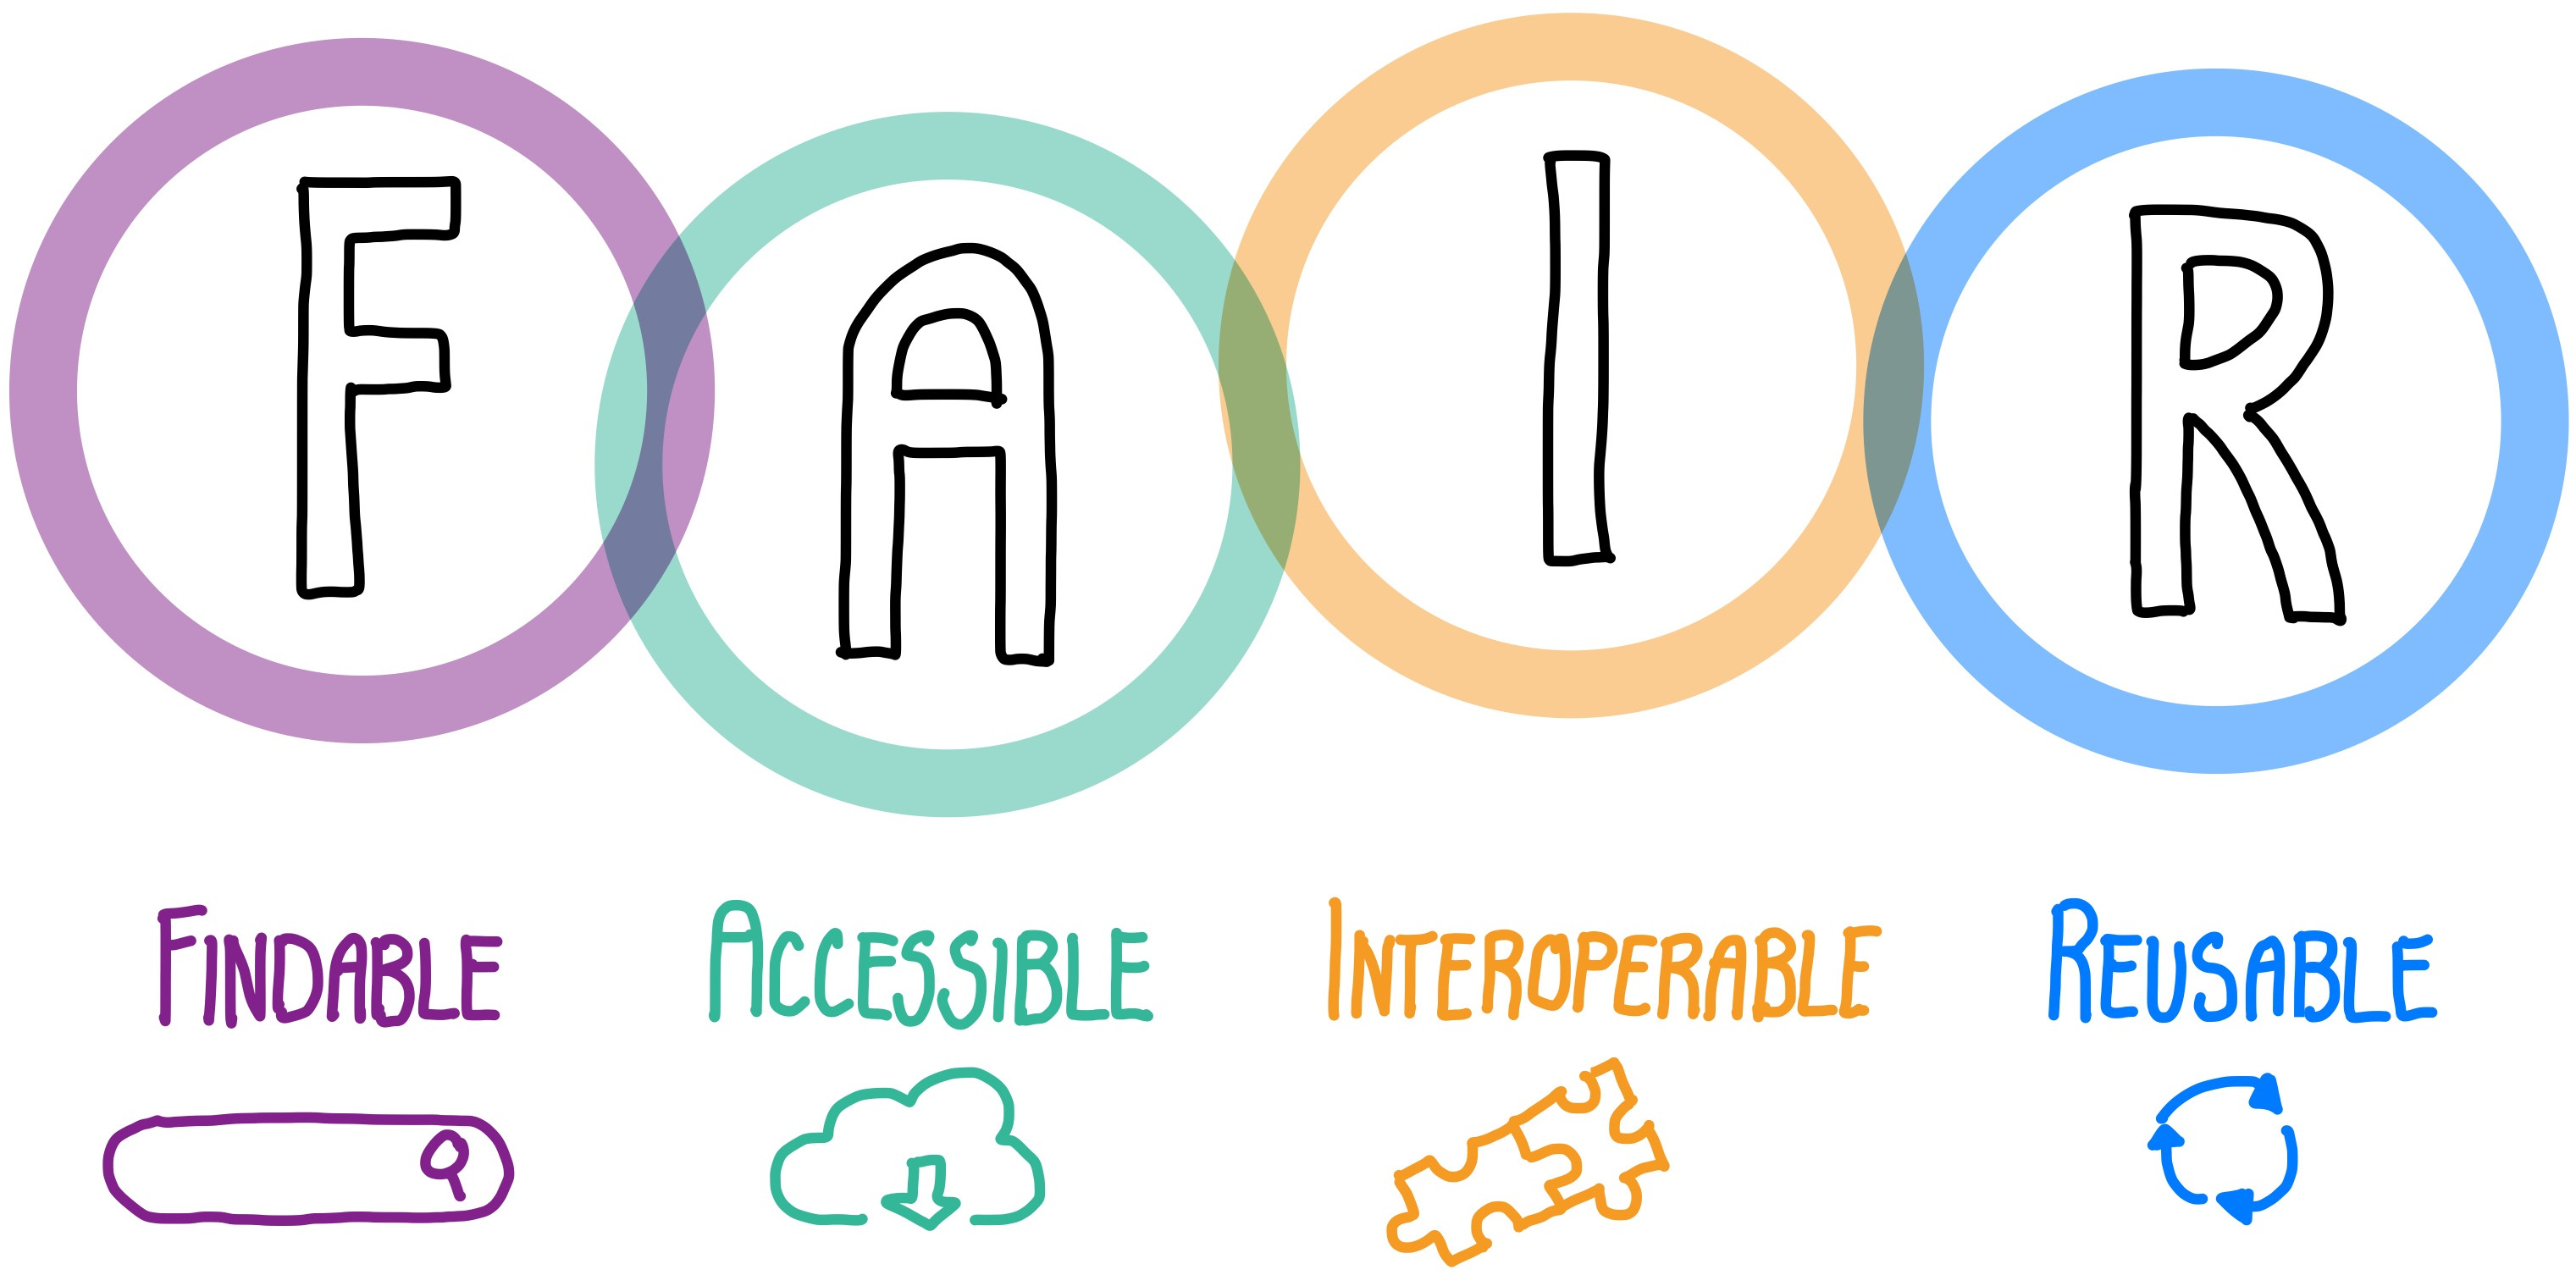 F=findable, A=accessible, I=interoperable, R=reusable